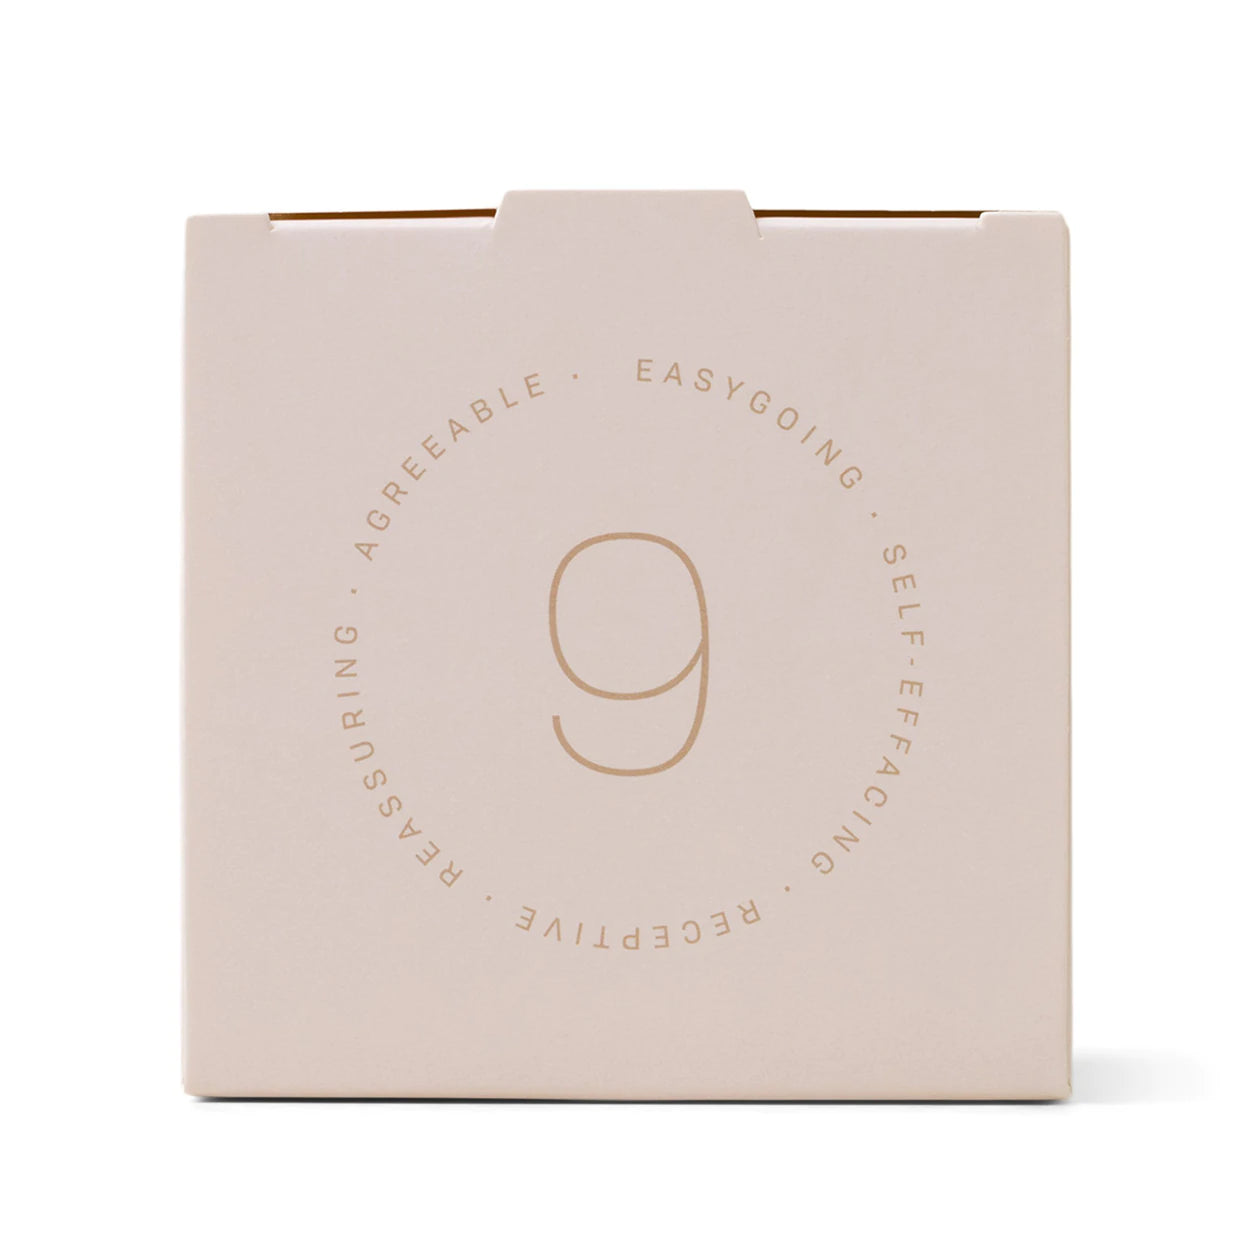 Enneagram #9 Peacemaker Candle